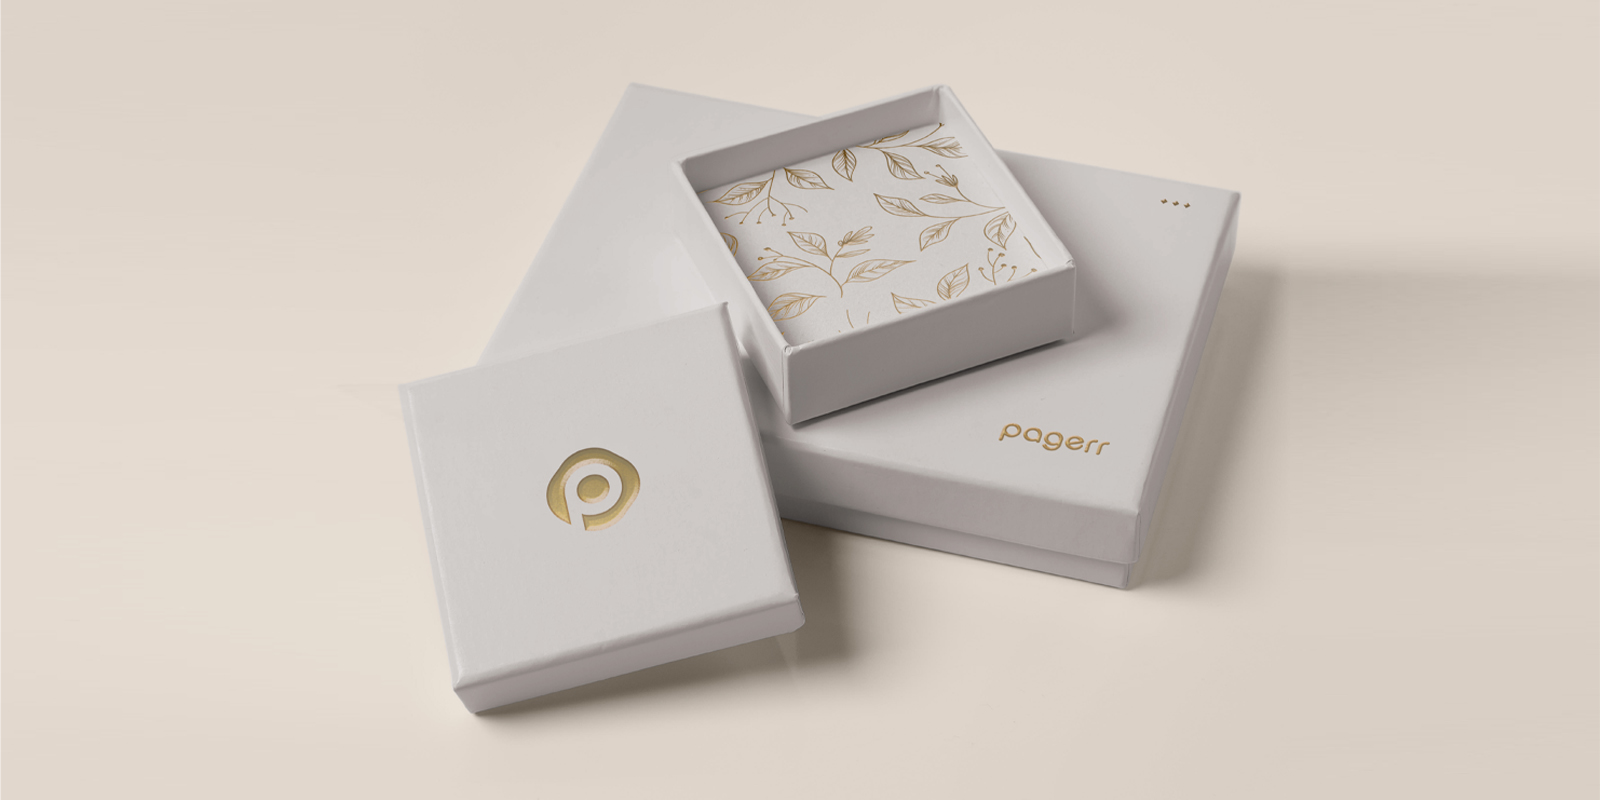 Product boxes in Tallinn - Print with Pagerr